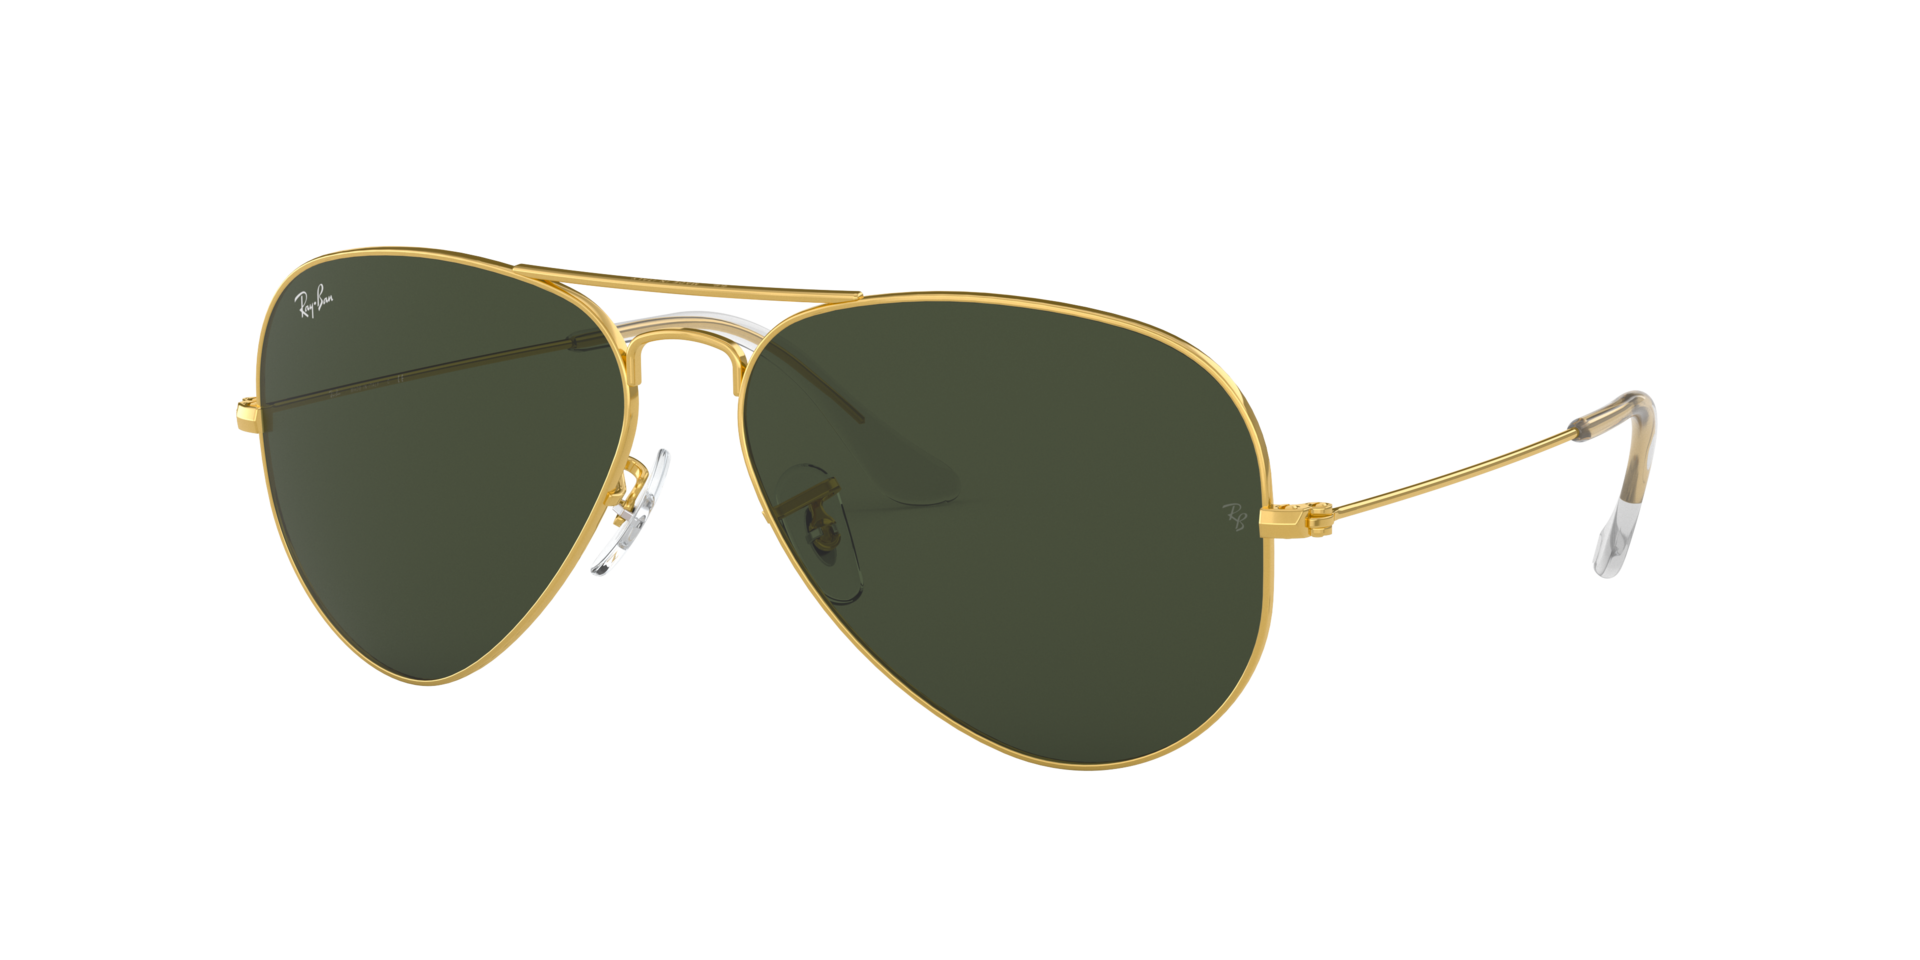 Ray-Ban Aviator Large Metal Sonnenbrille in Gold RB3025 001 62